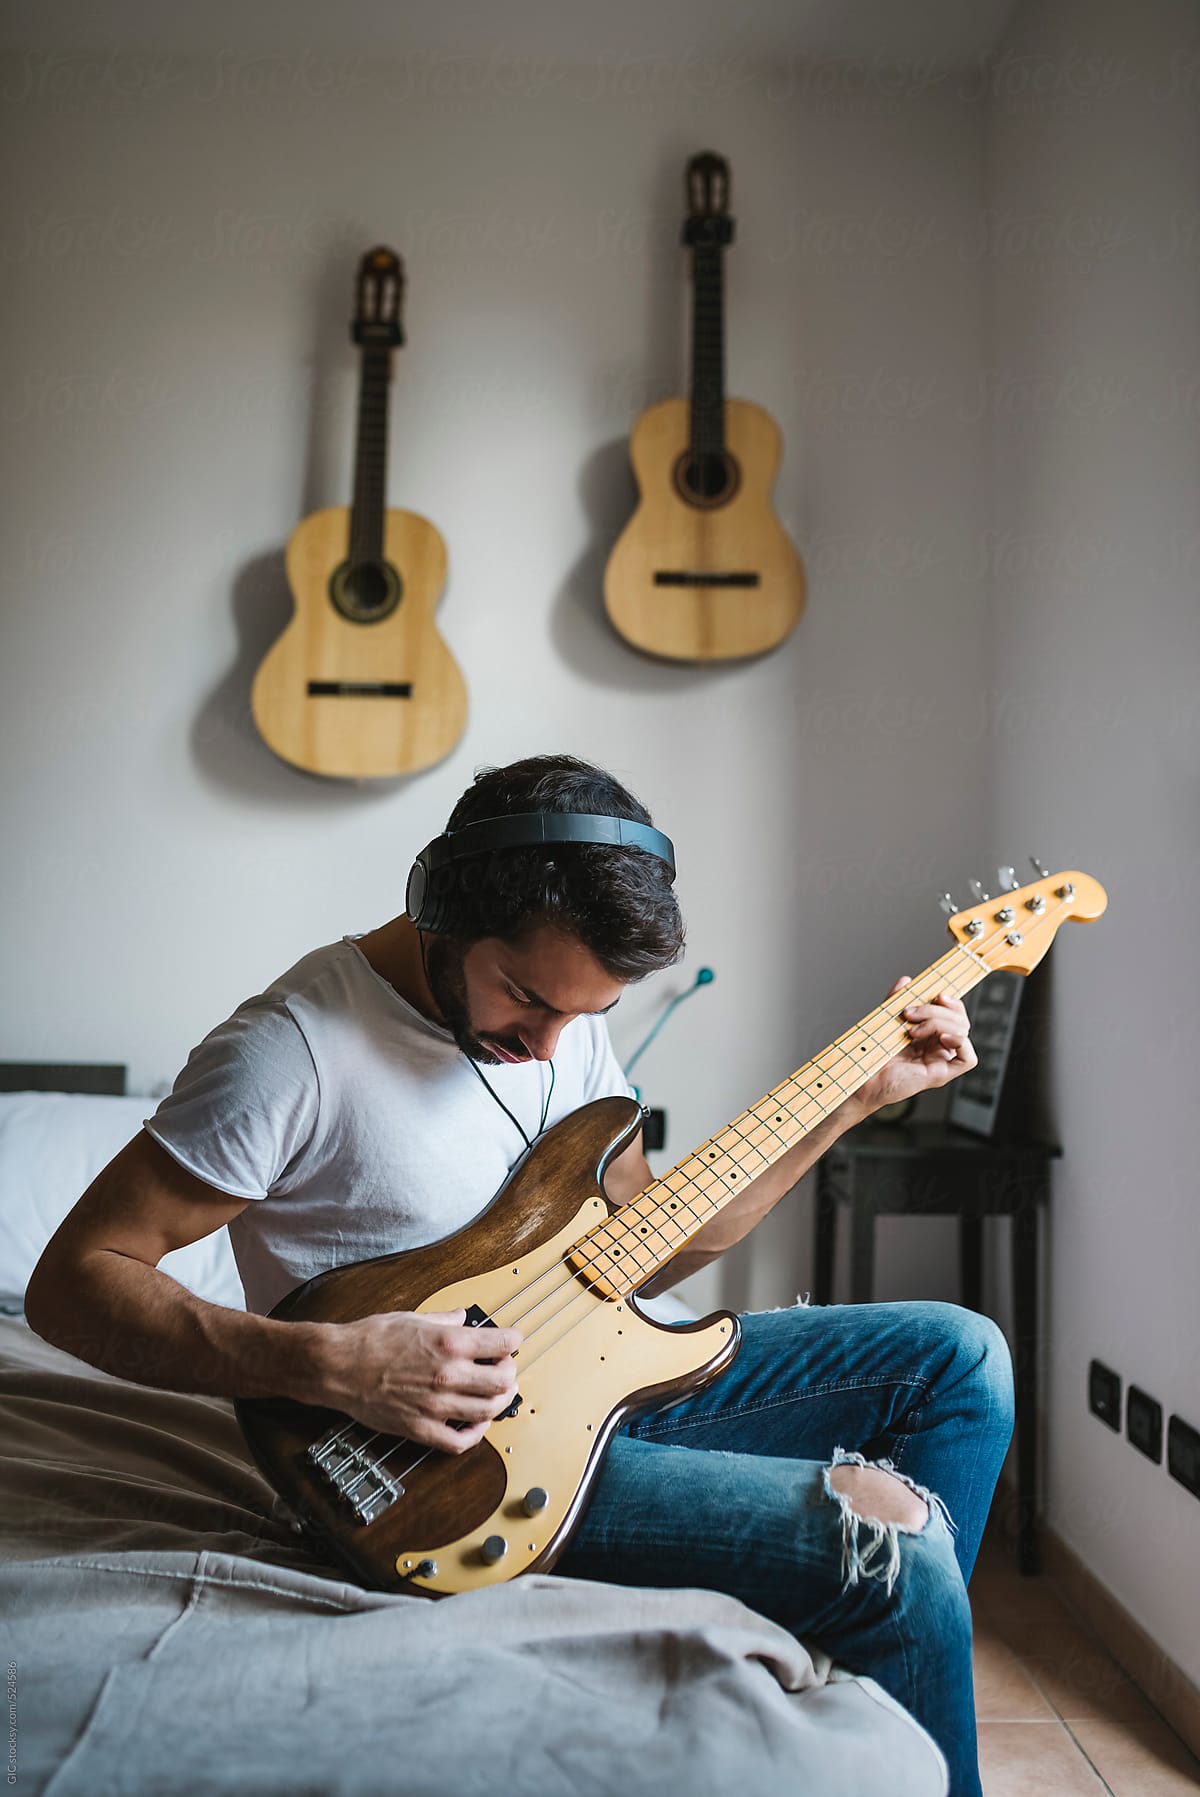 Man Playing Bass Guitar At Home by Stocksy Contributor Simone Wave -  Stocksy